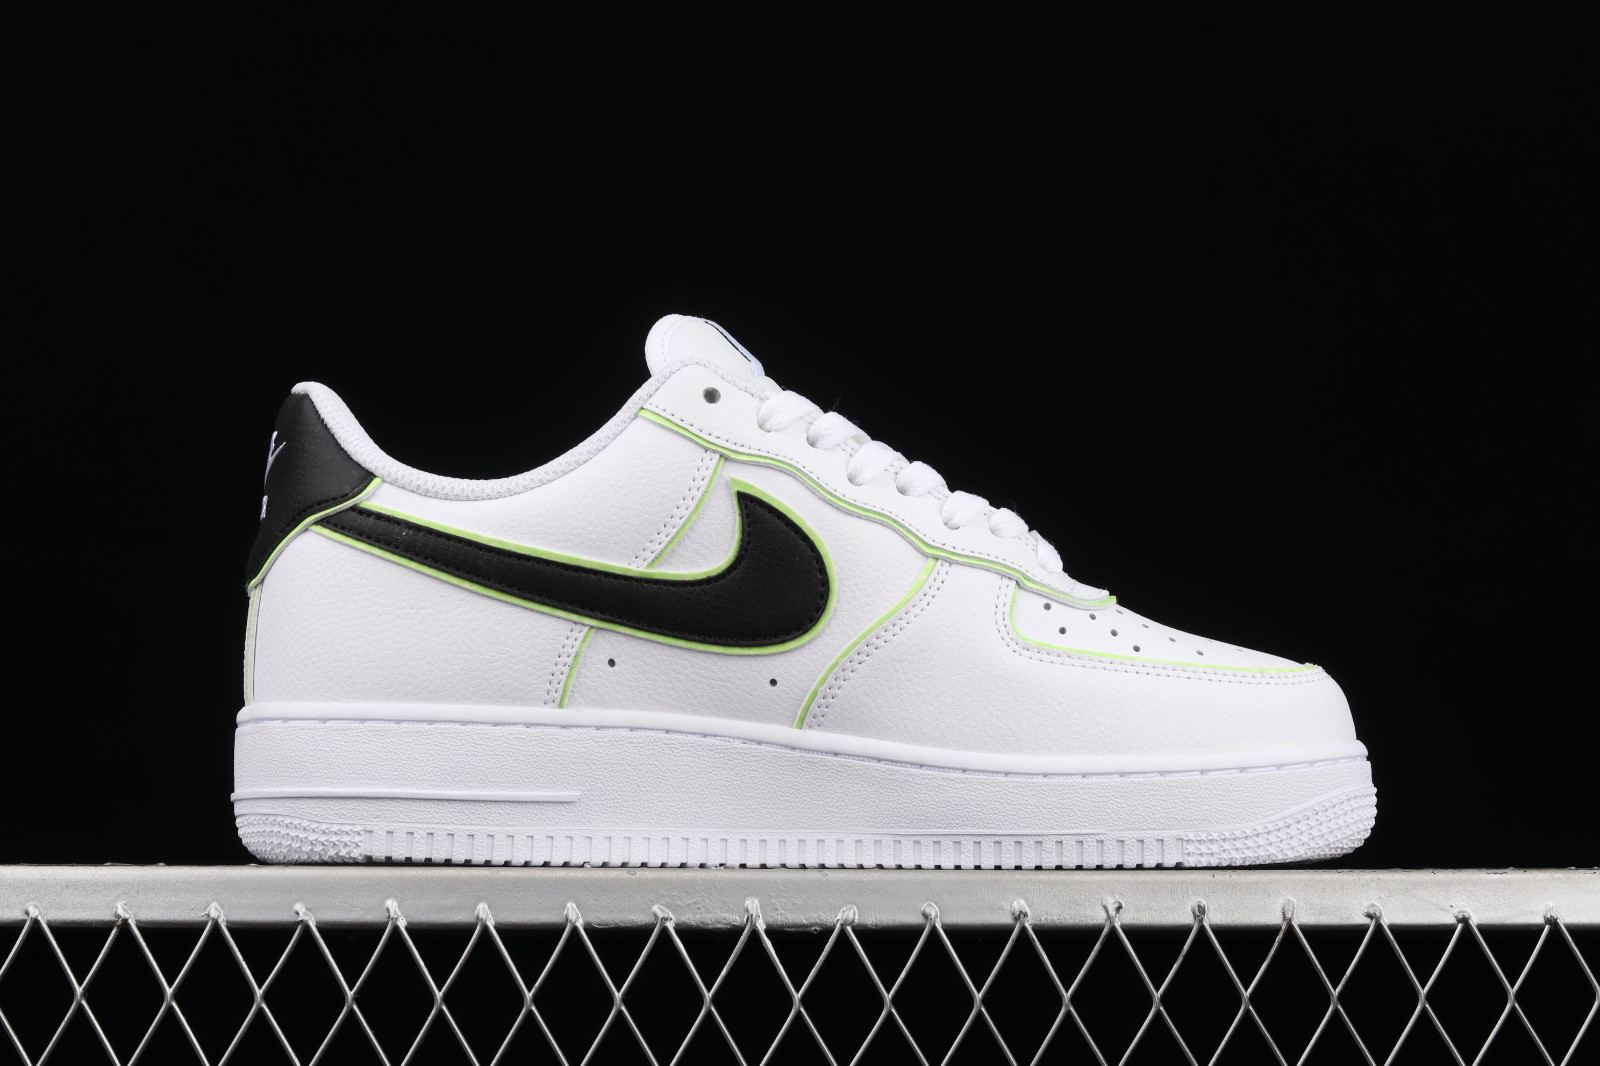 Campaña Dato Arquitectura Nike Air Force 1 07 Low White Black Green Shoes CW2288 - nike lebron james  sneaker 2015 release schedule - GmarShops - 304